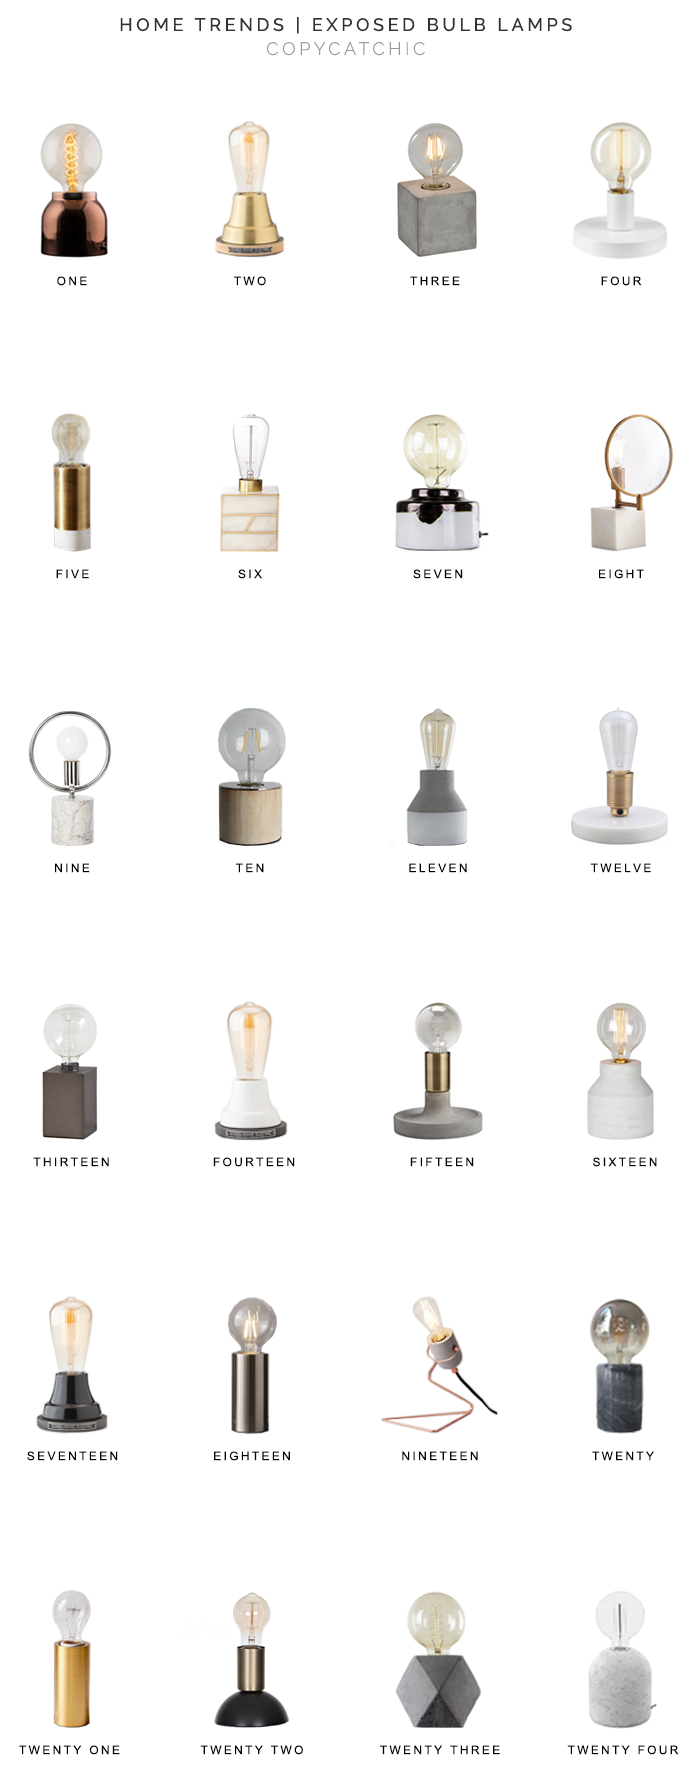 exposed bulb lamp look for less, exposed bulb lamps for less, modern lamps, contemporary lamps, copycatchic luxe living for less, budget home decor and design, daily finds, home trends, sales, budget travel and room redos